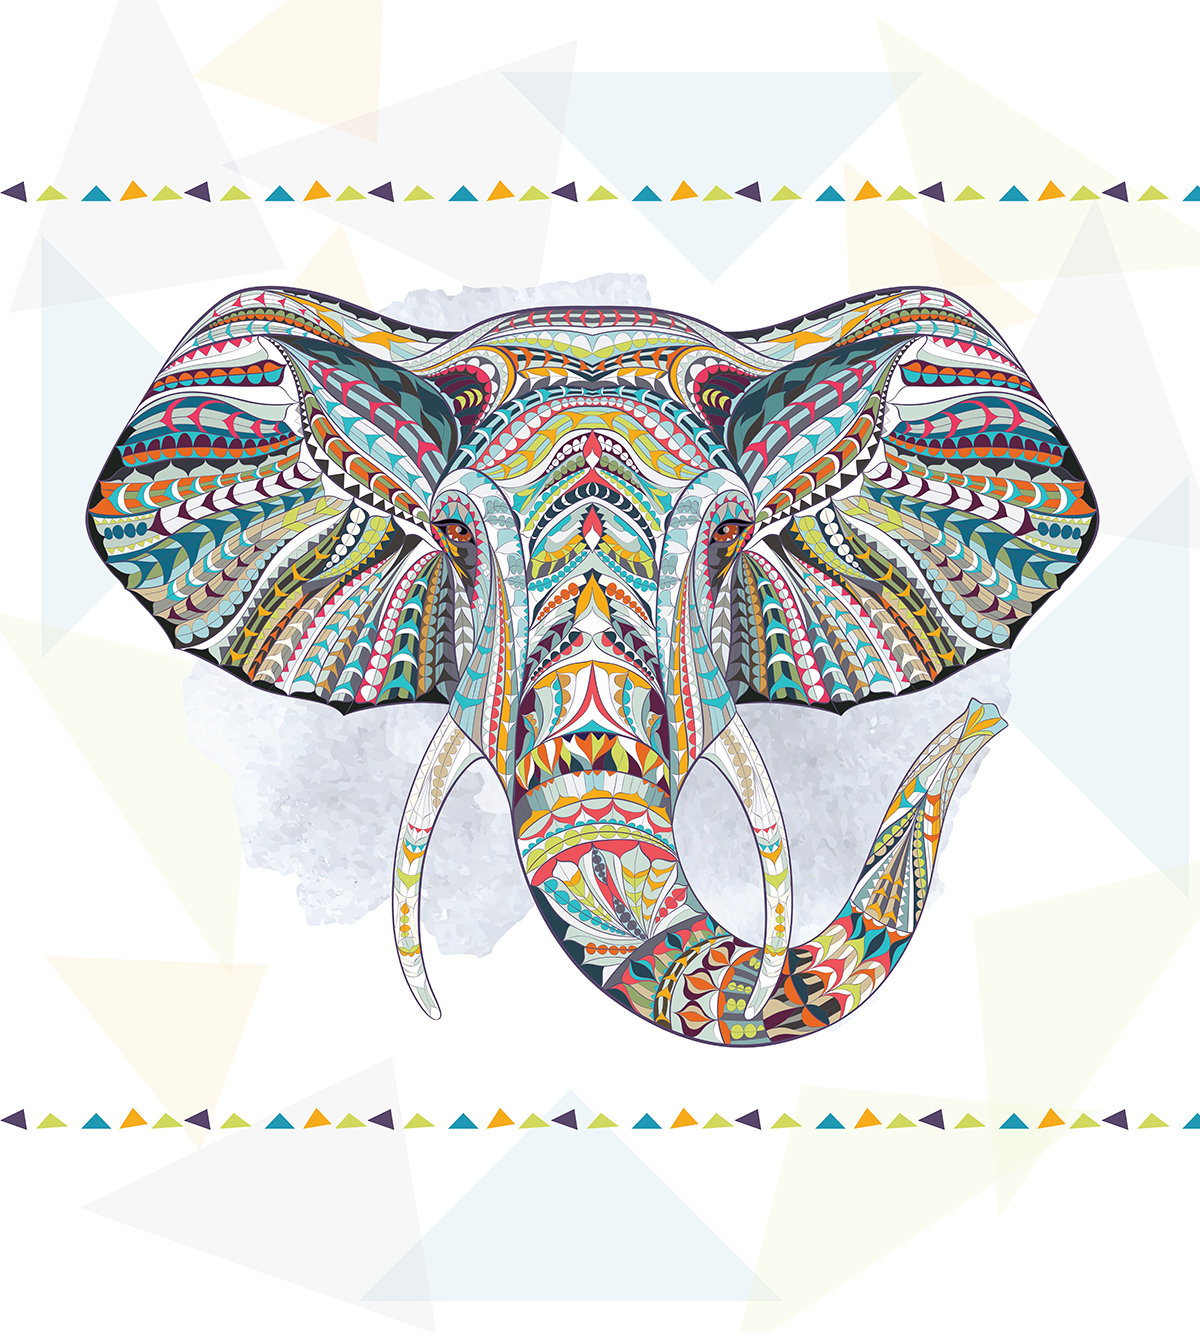 An elephant with colorful patterns